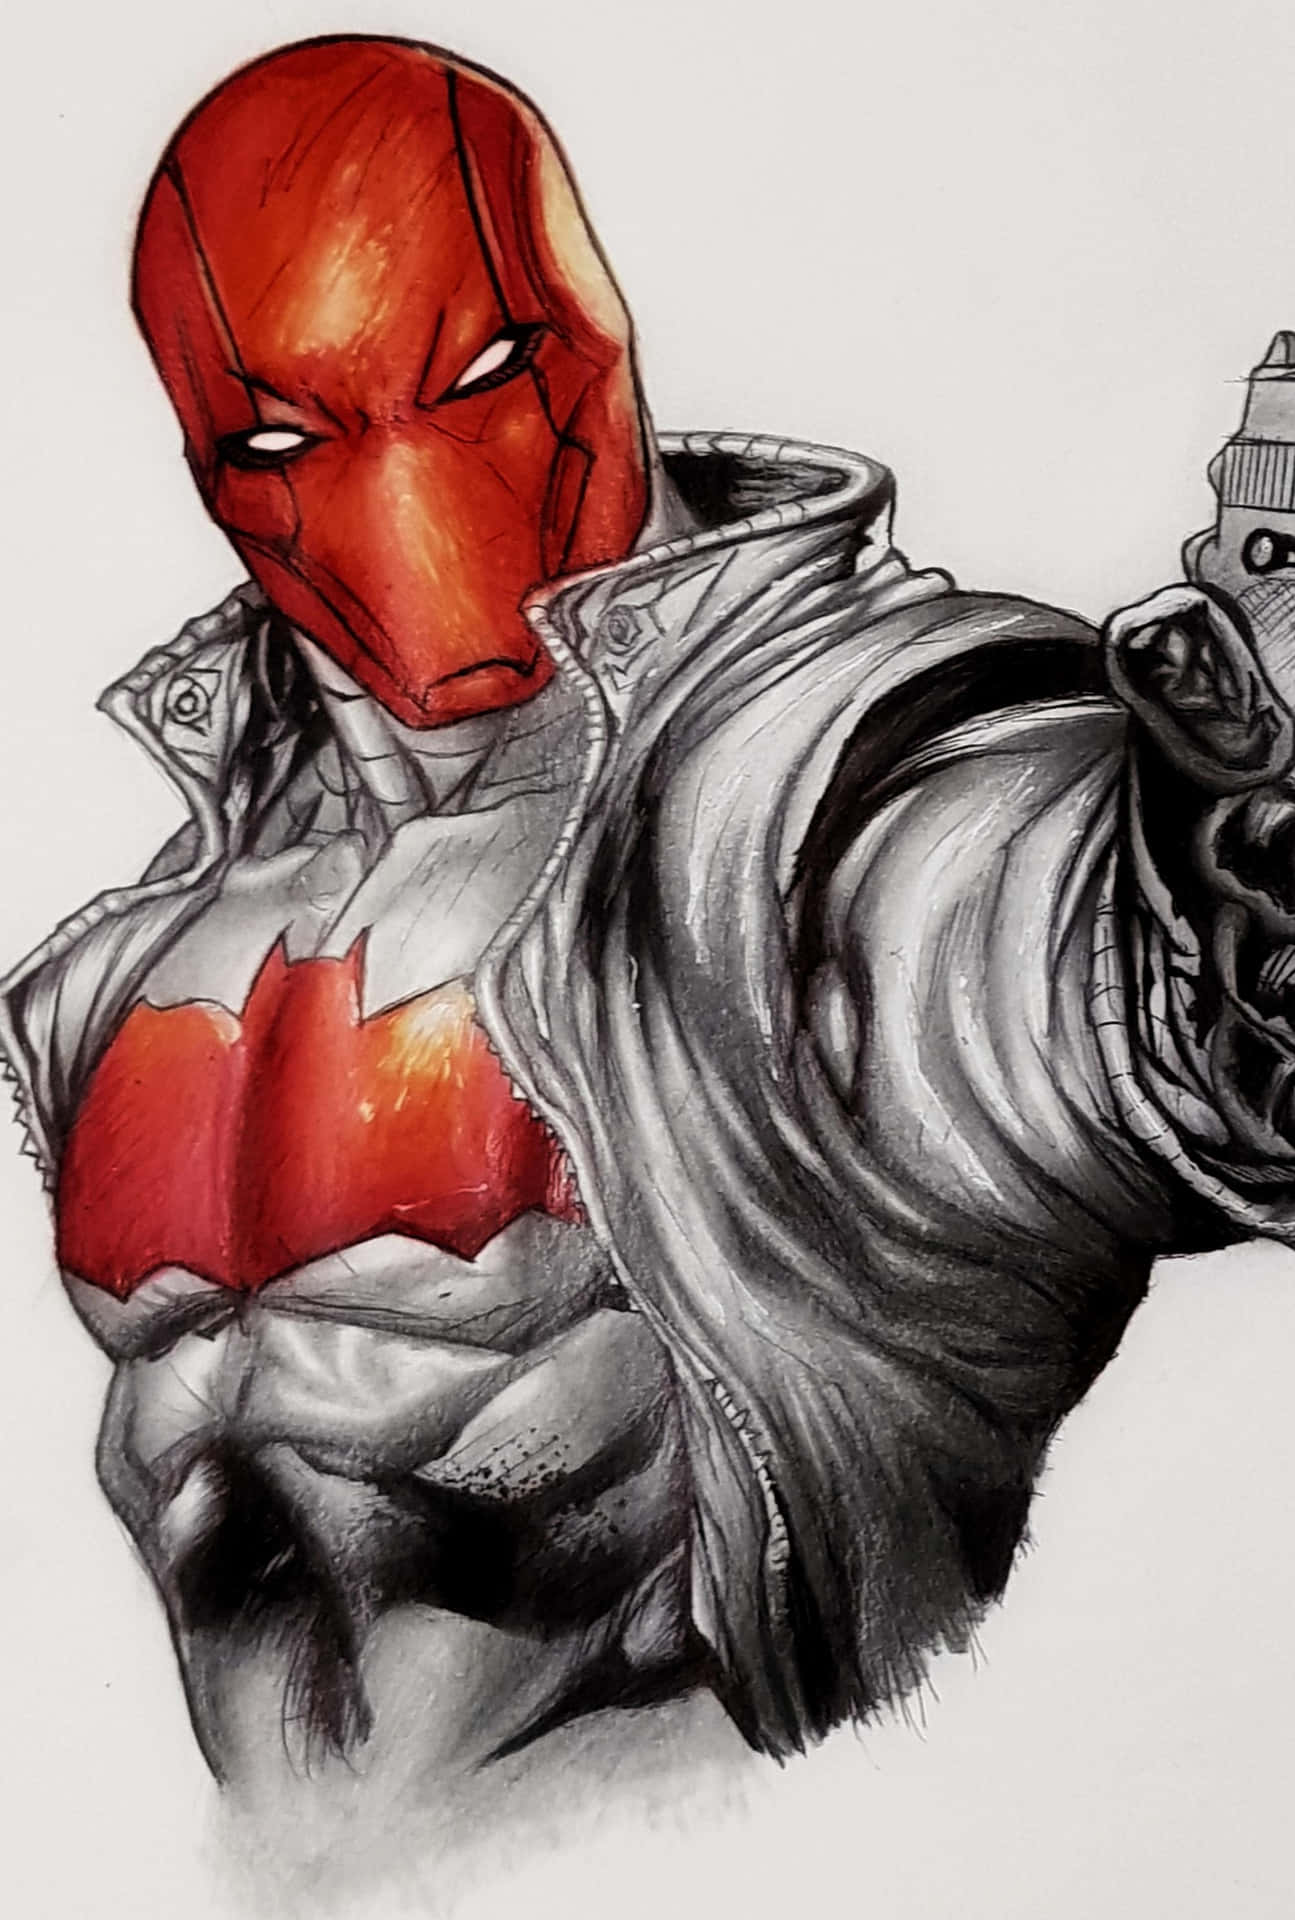 Red Hood stands ready to take on any challenge.